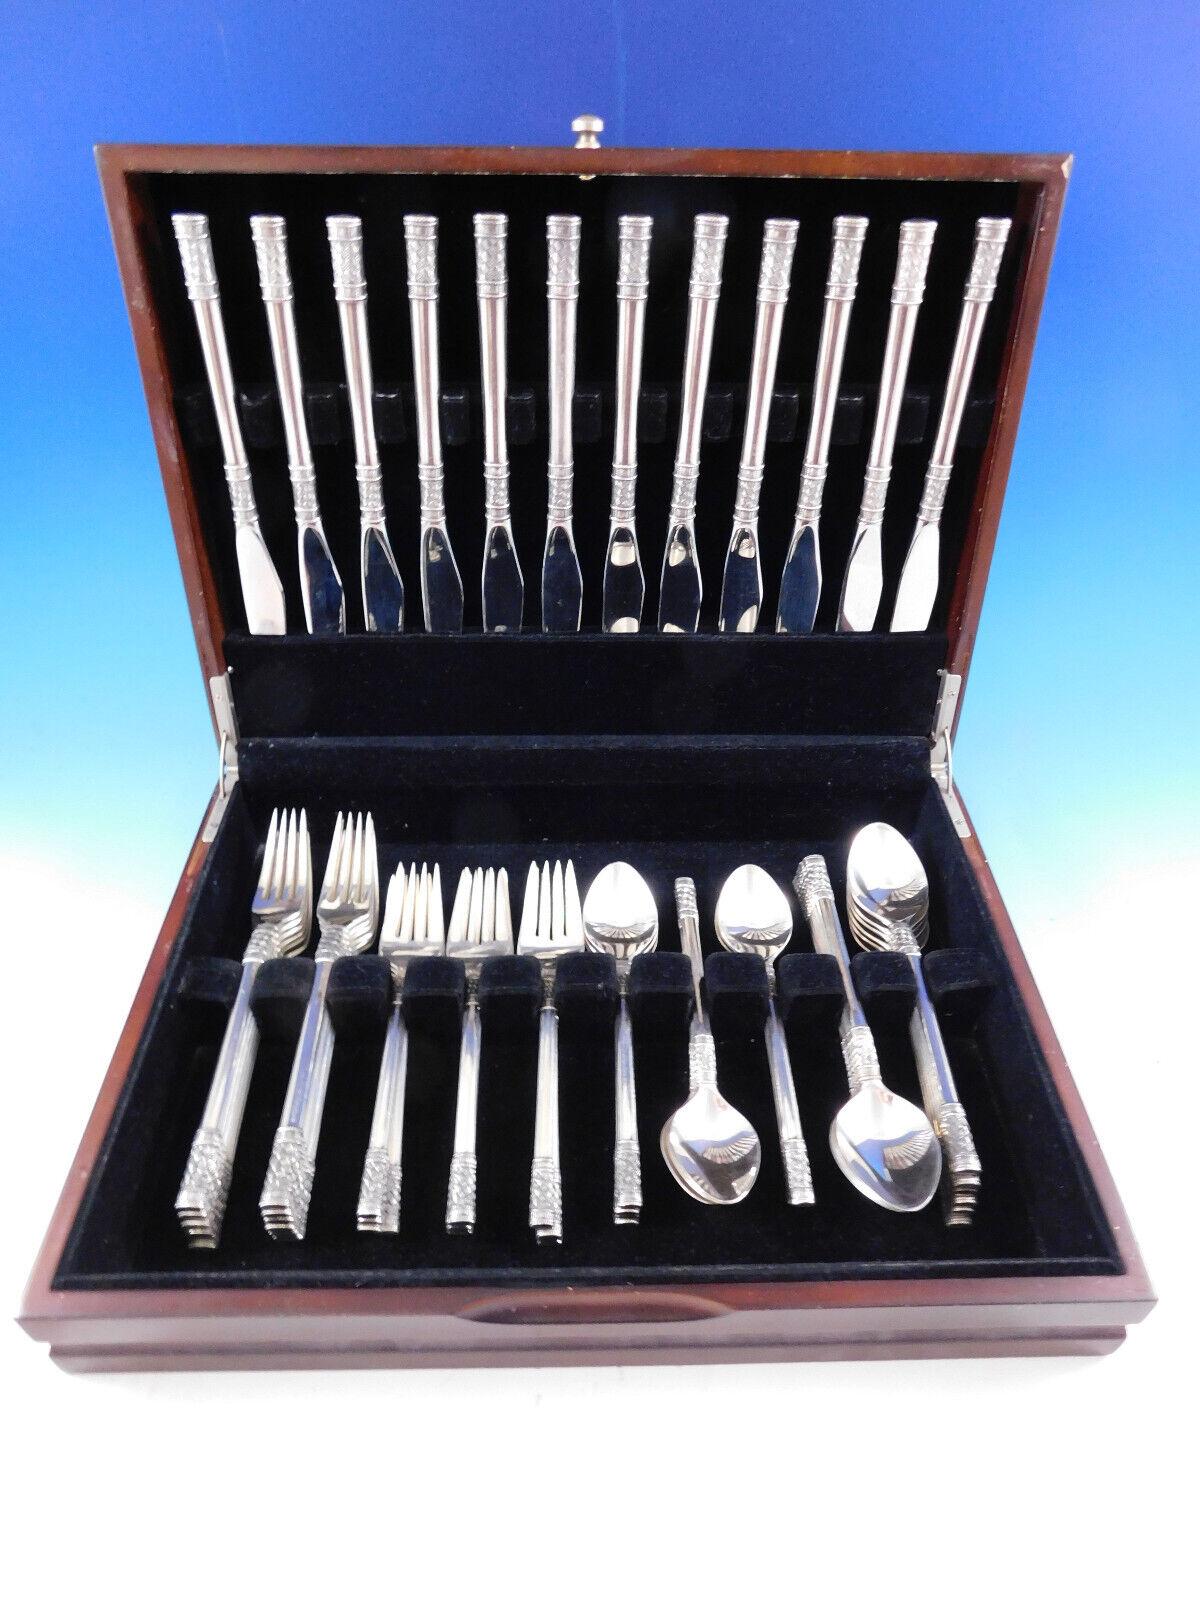 Aegean Weave Plain by Wallace Sterling Silver Flatware set - 60 pieces. This set includes:

12 Knives, 9 3/8